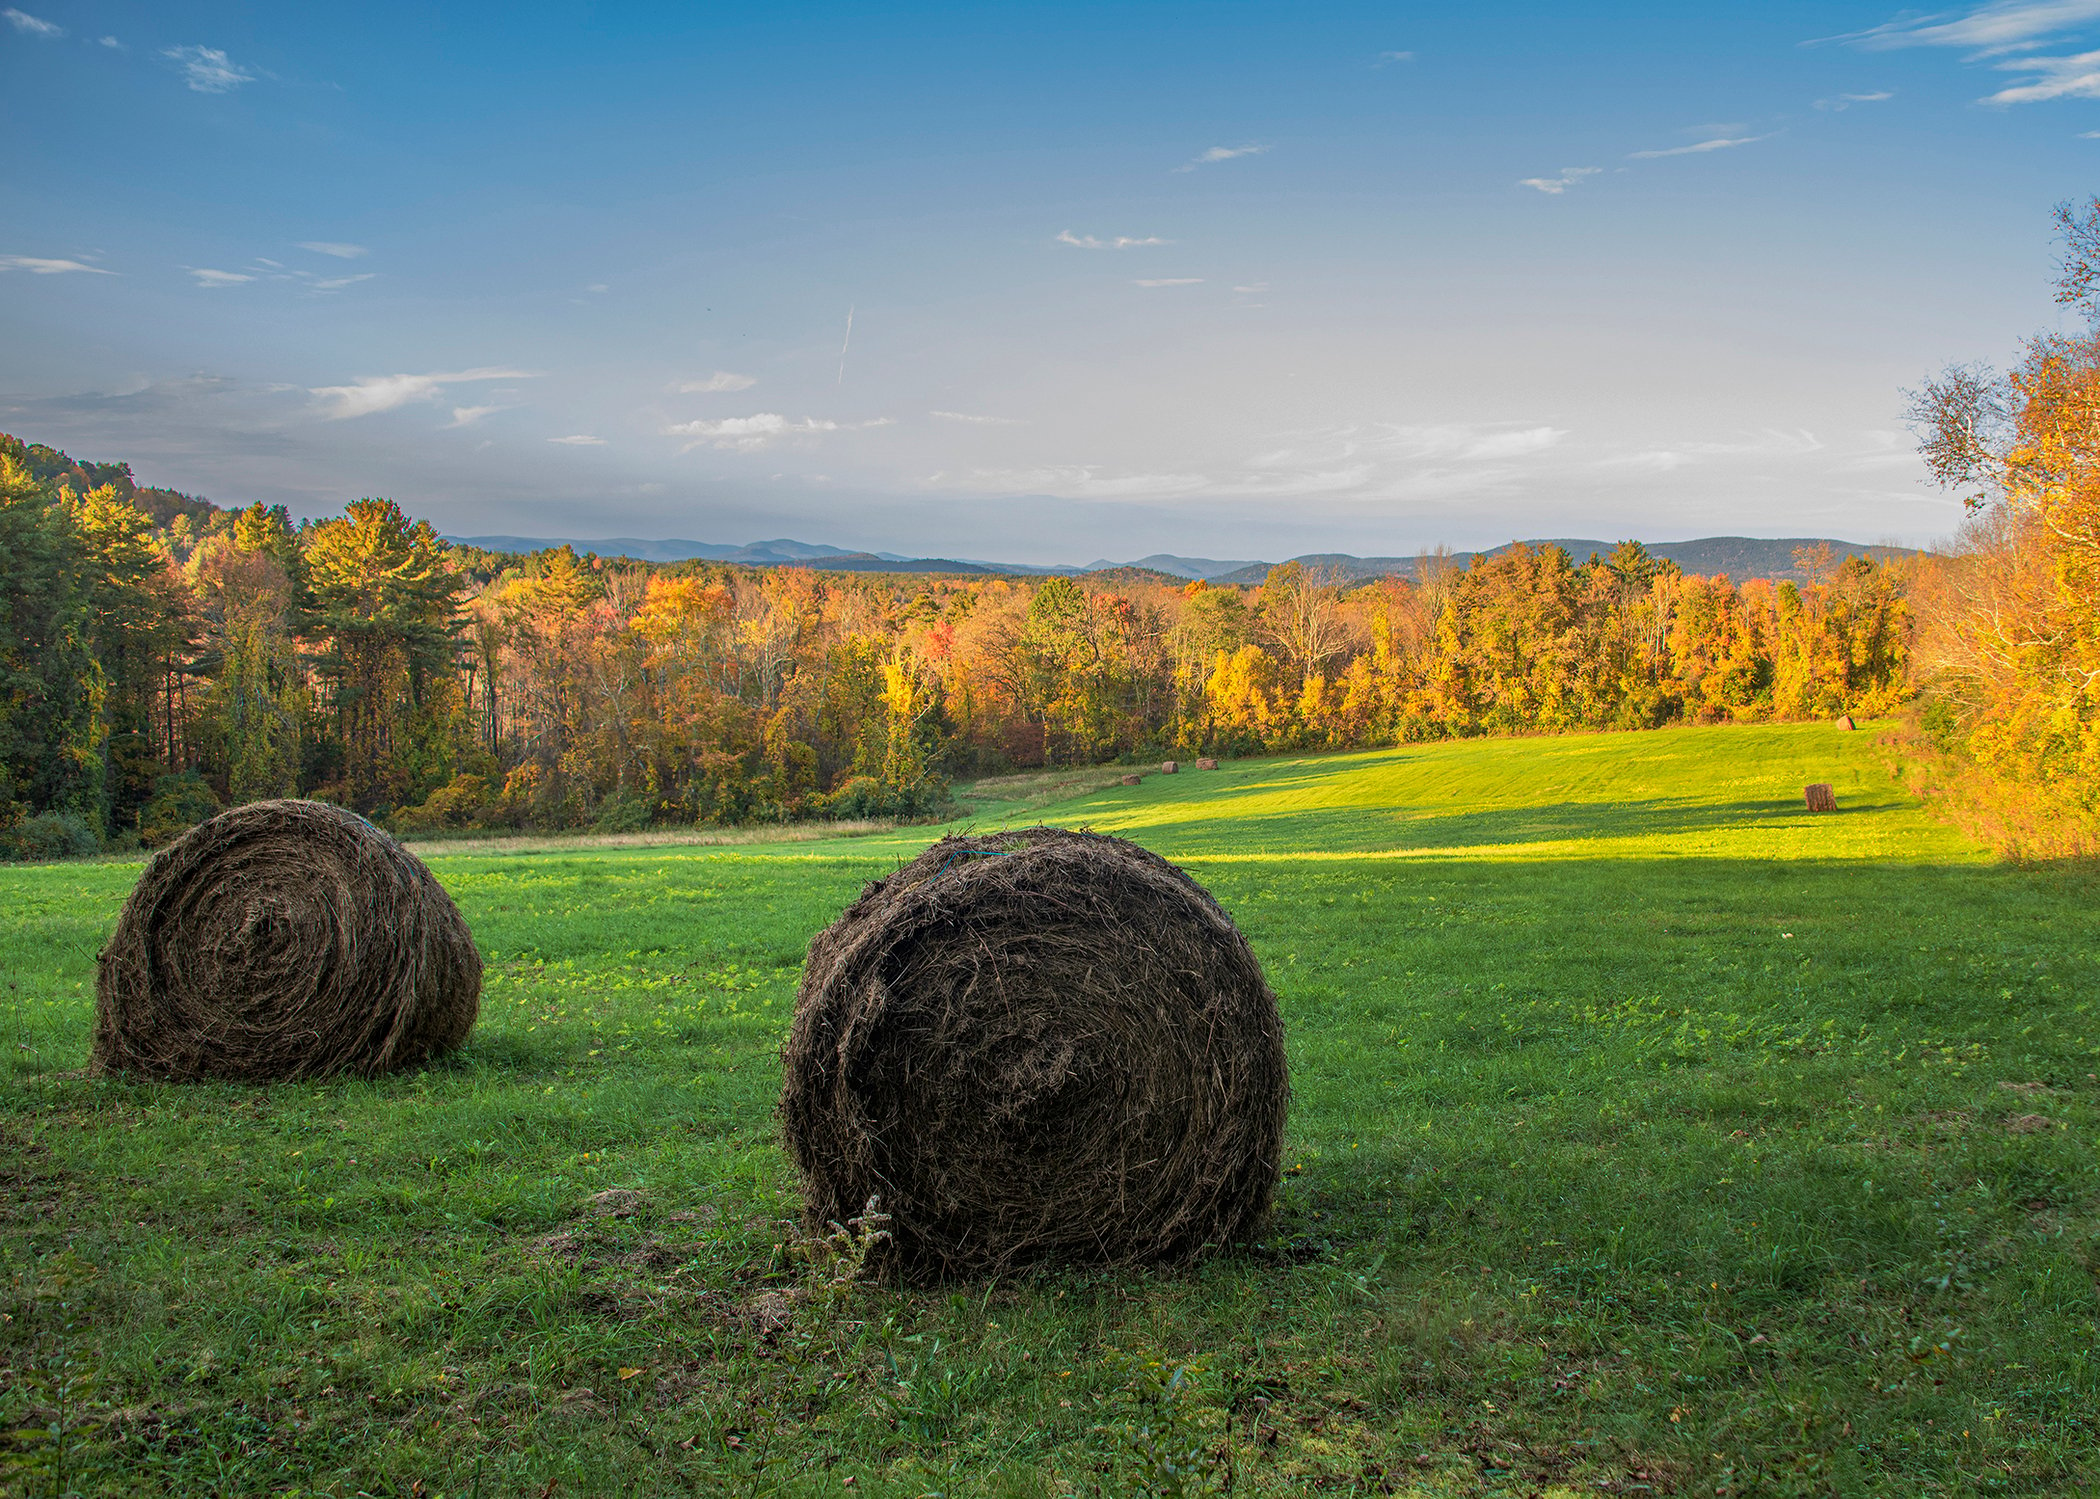 Two hay bales sitting on a green grassland surrounded by fall foliage.